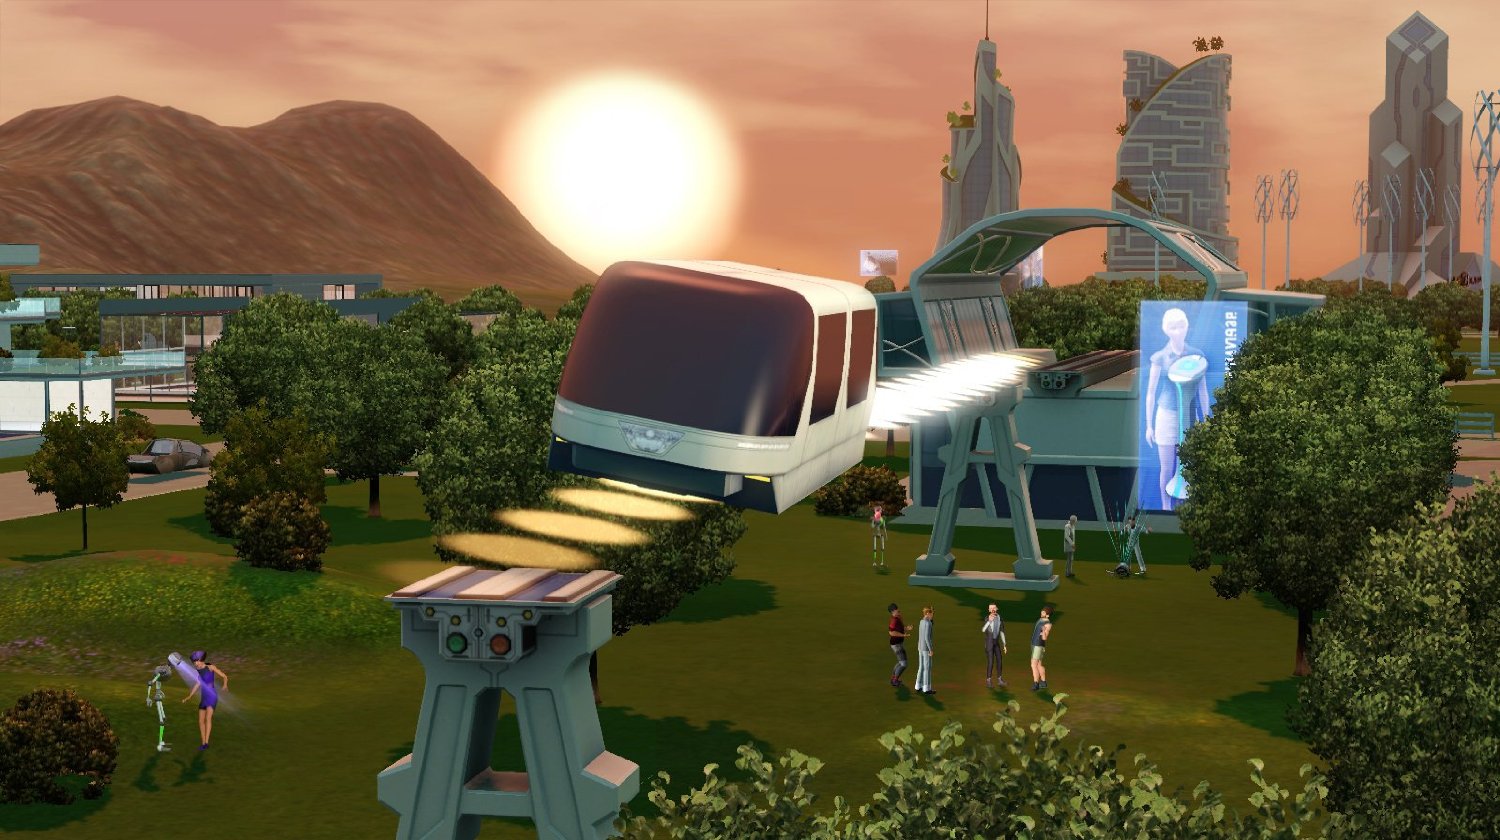 sims 3 into the future limited edition